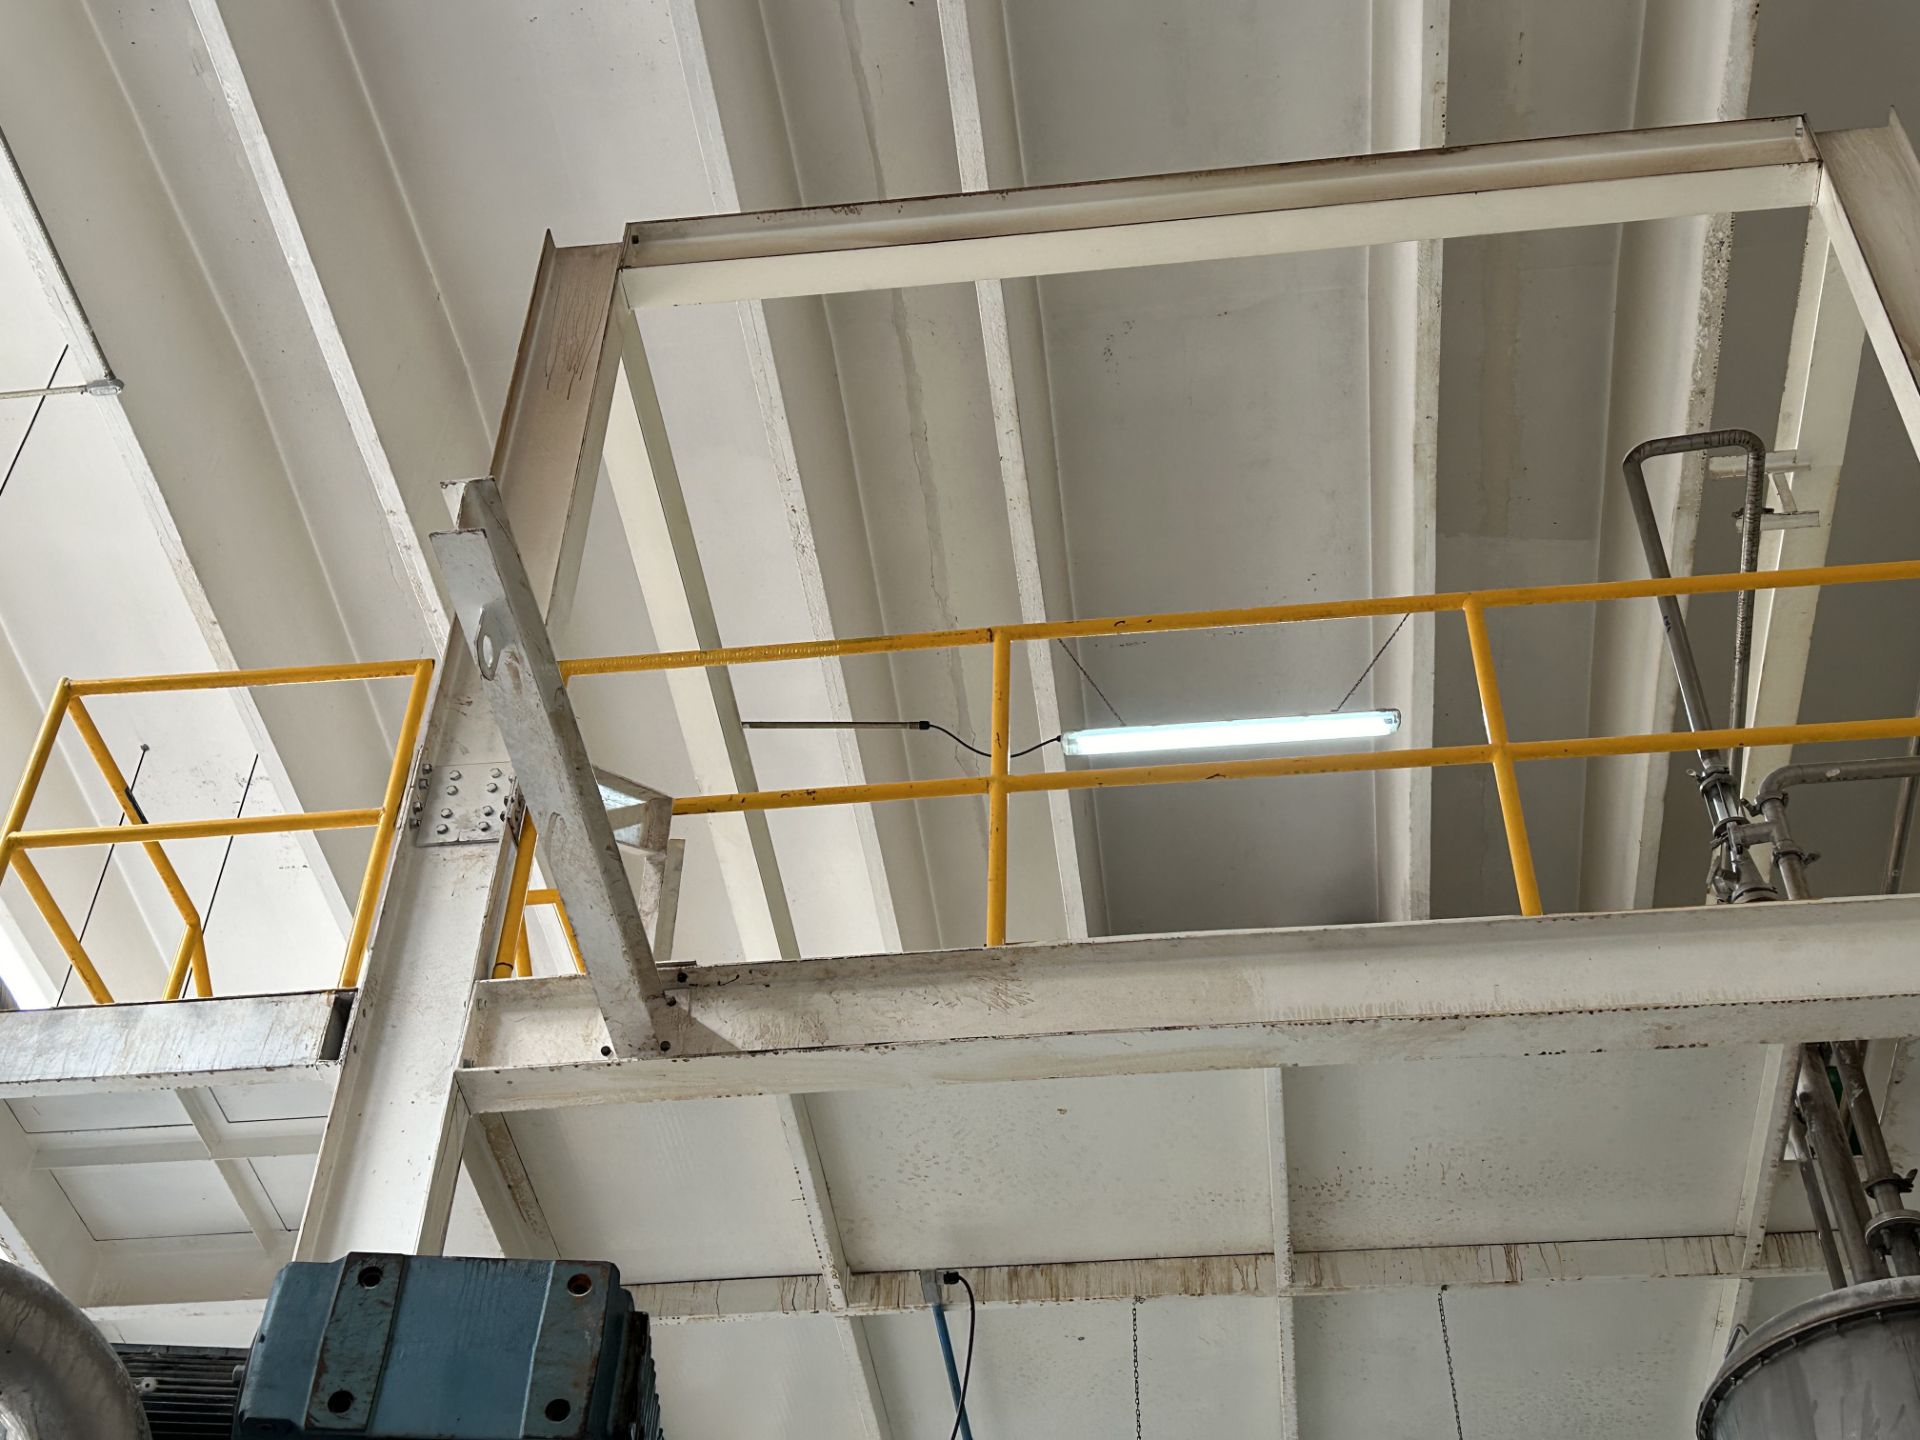 1 Mezzanine of 3 levels with IPR joist, measuring approximately 7.80 x 4.10 x 11.6 m, contains: 22 - Image 29 of 30